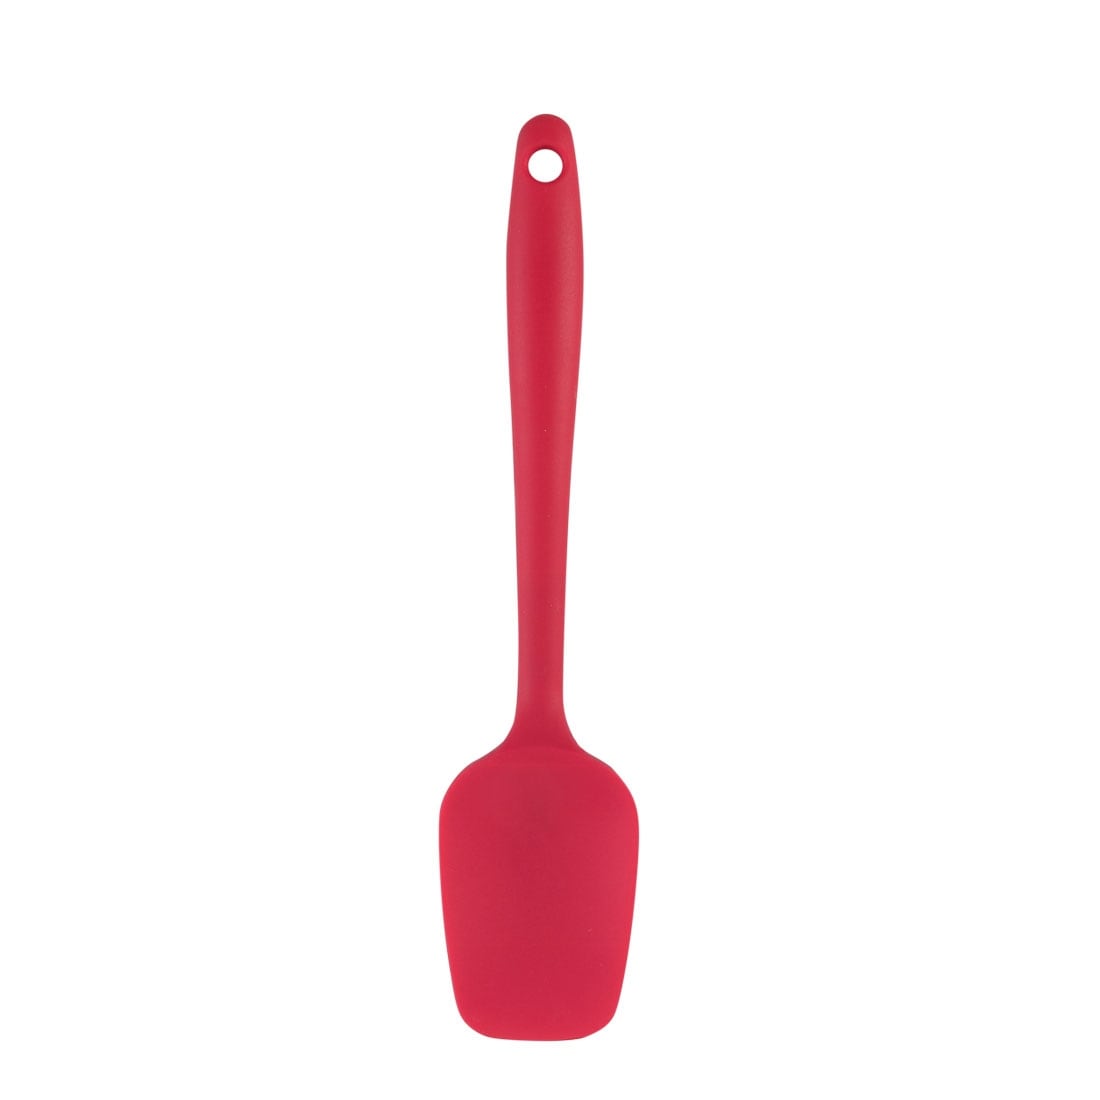 https://ak1.ostkcdn.com/images/products/is/images/direct/b35ba3ca50dc9449afeb655aa05382172a9e78f1/Silicone-Spatula-Heat-Resistant-Rubber-Flipping-Turner-for-Cooking.jpg